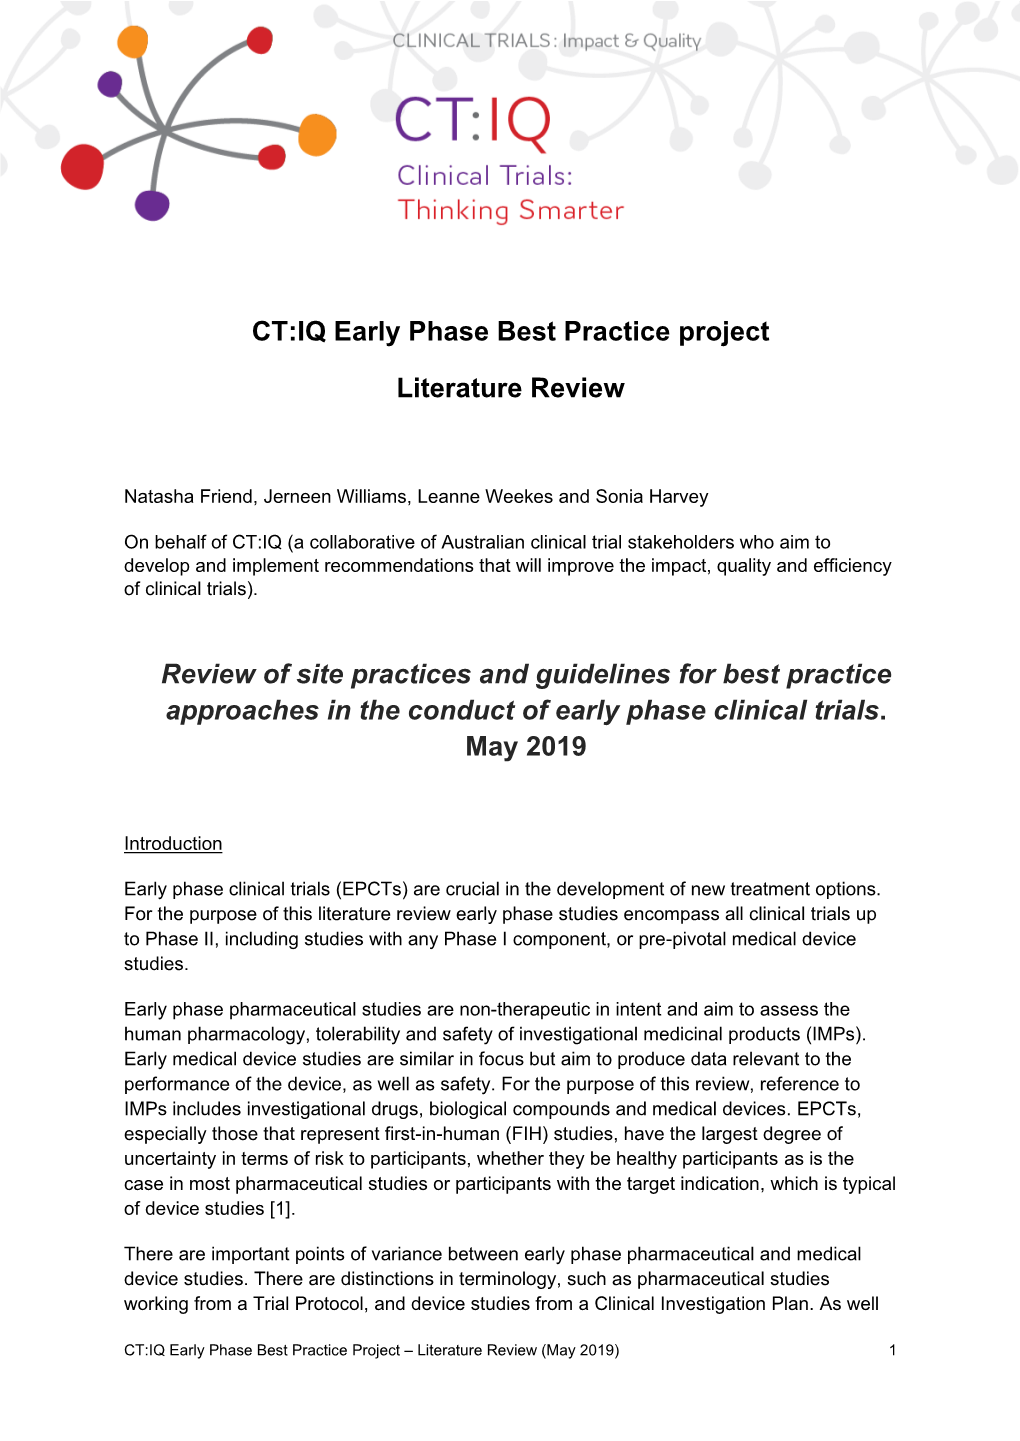 CT:IQ Early Phase Best Practice Project Literature Review Review Of